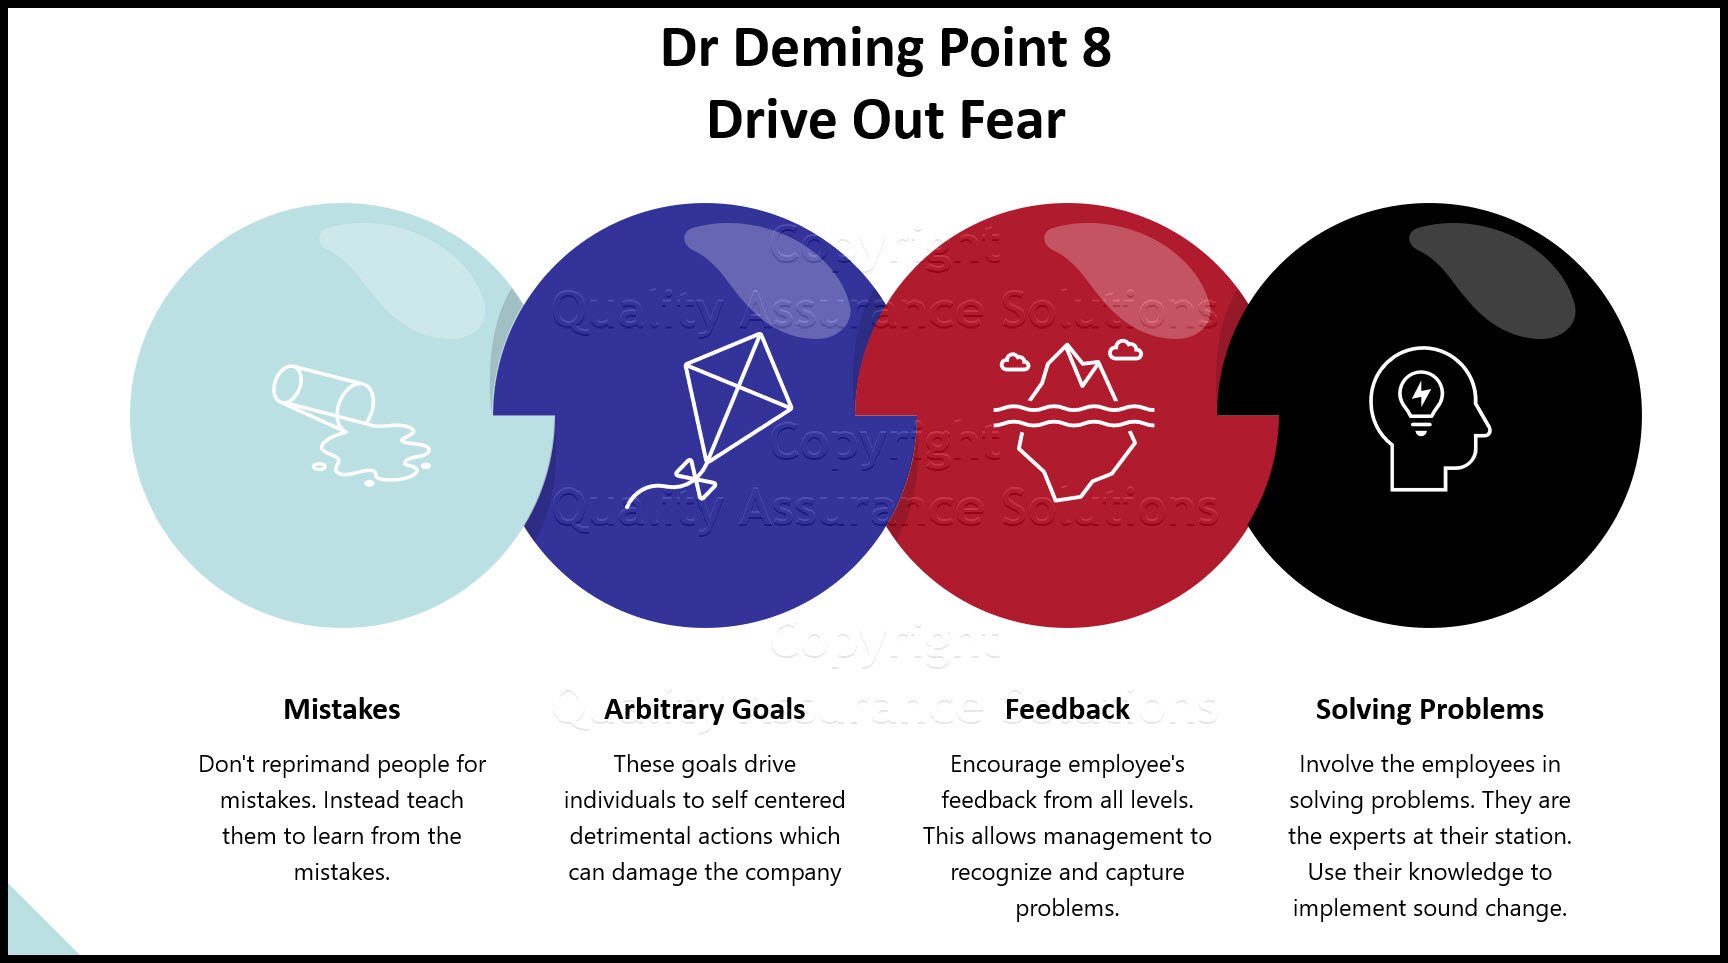 Page discusses Dr Deming Point 8 in detail. Learn how to drive out fear in the workplace. 